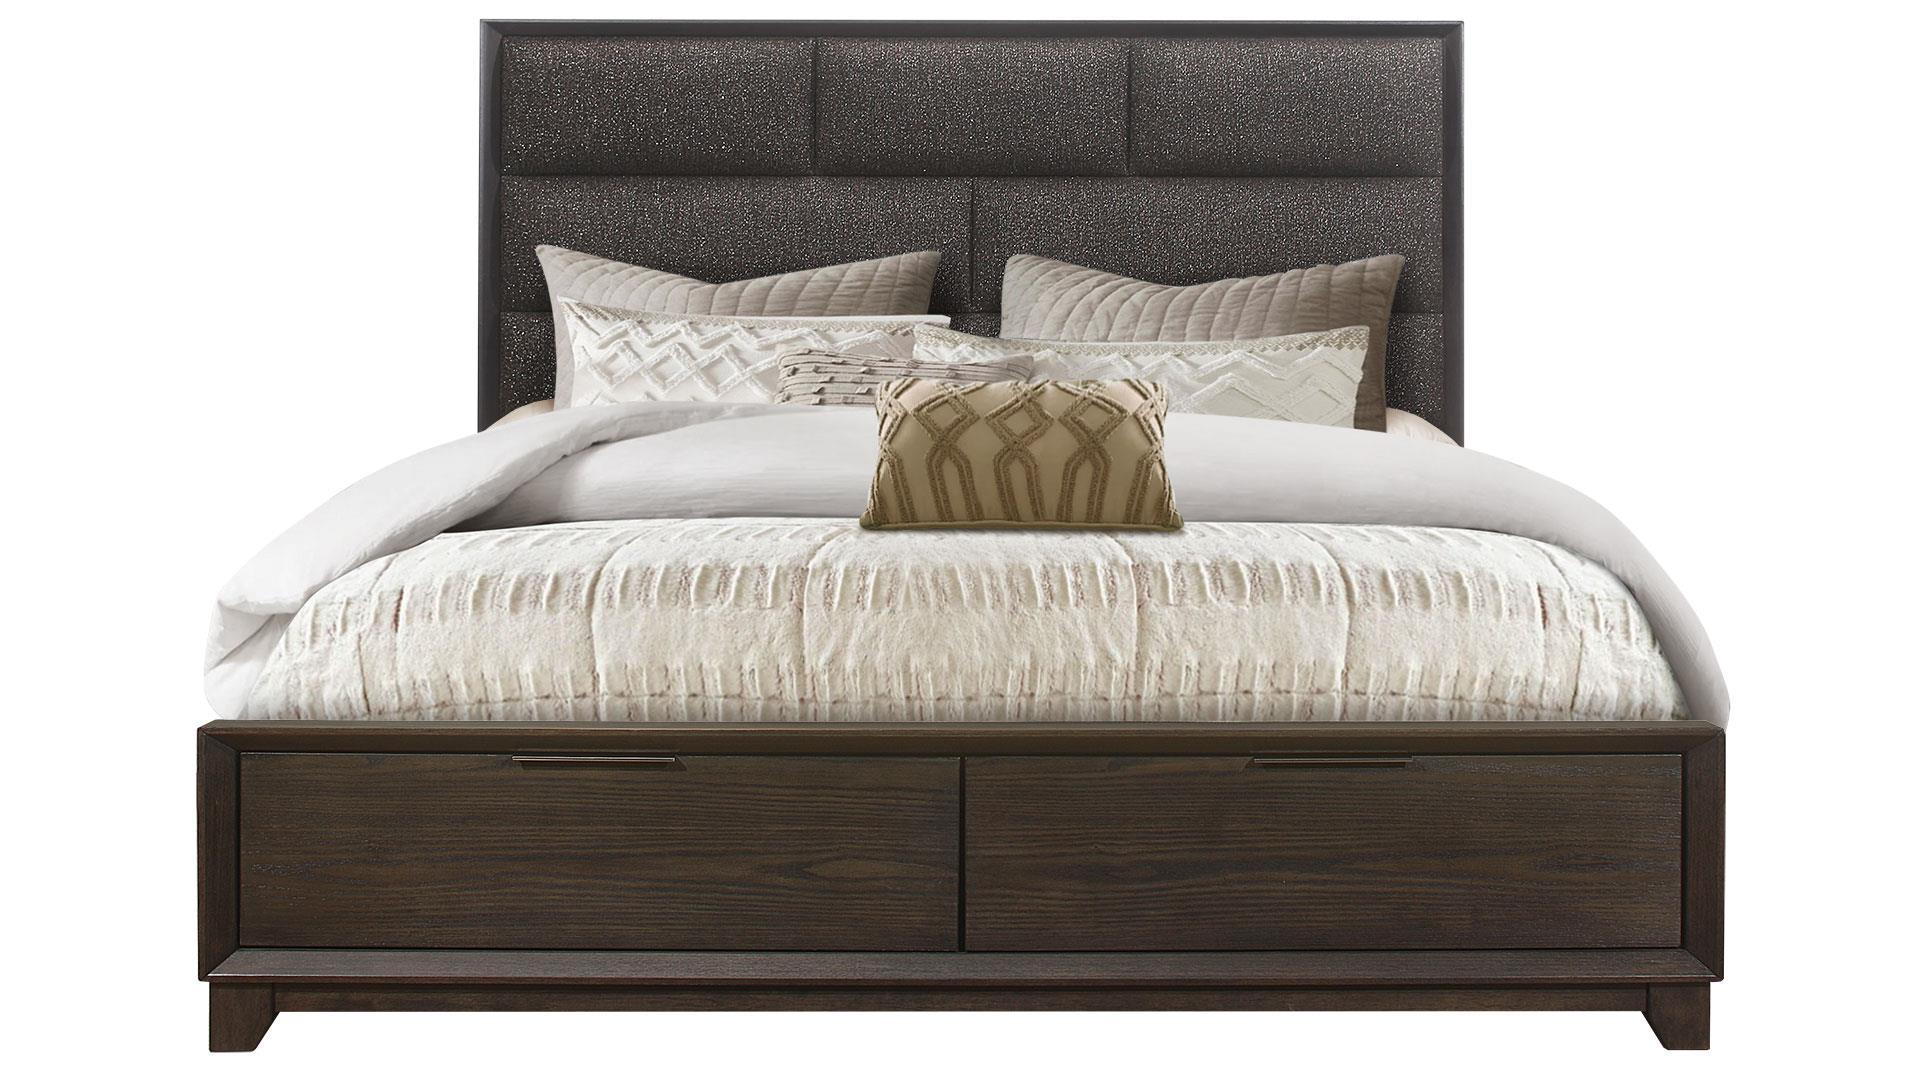 Contemporary Platform Bed WILLOW WILLOW-QB in Gray, Chocolate Fabric